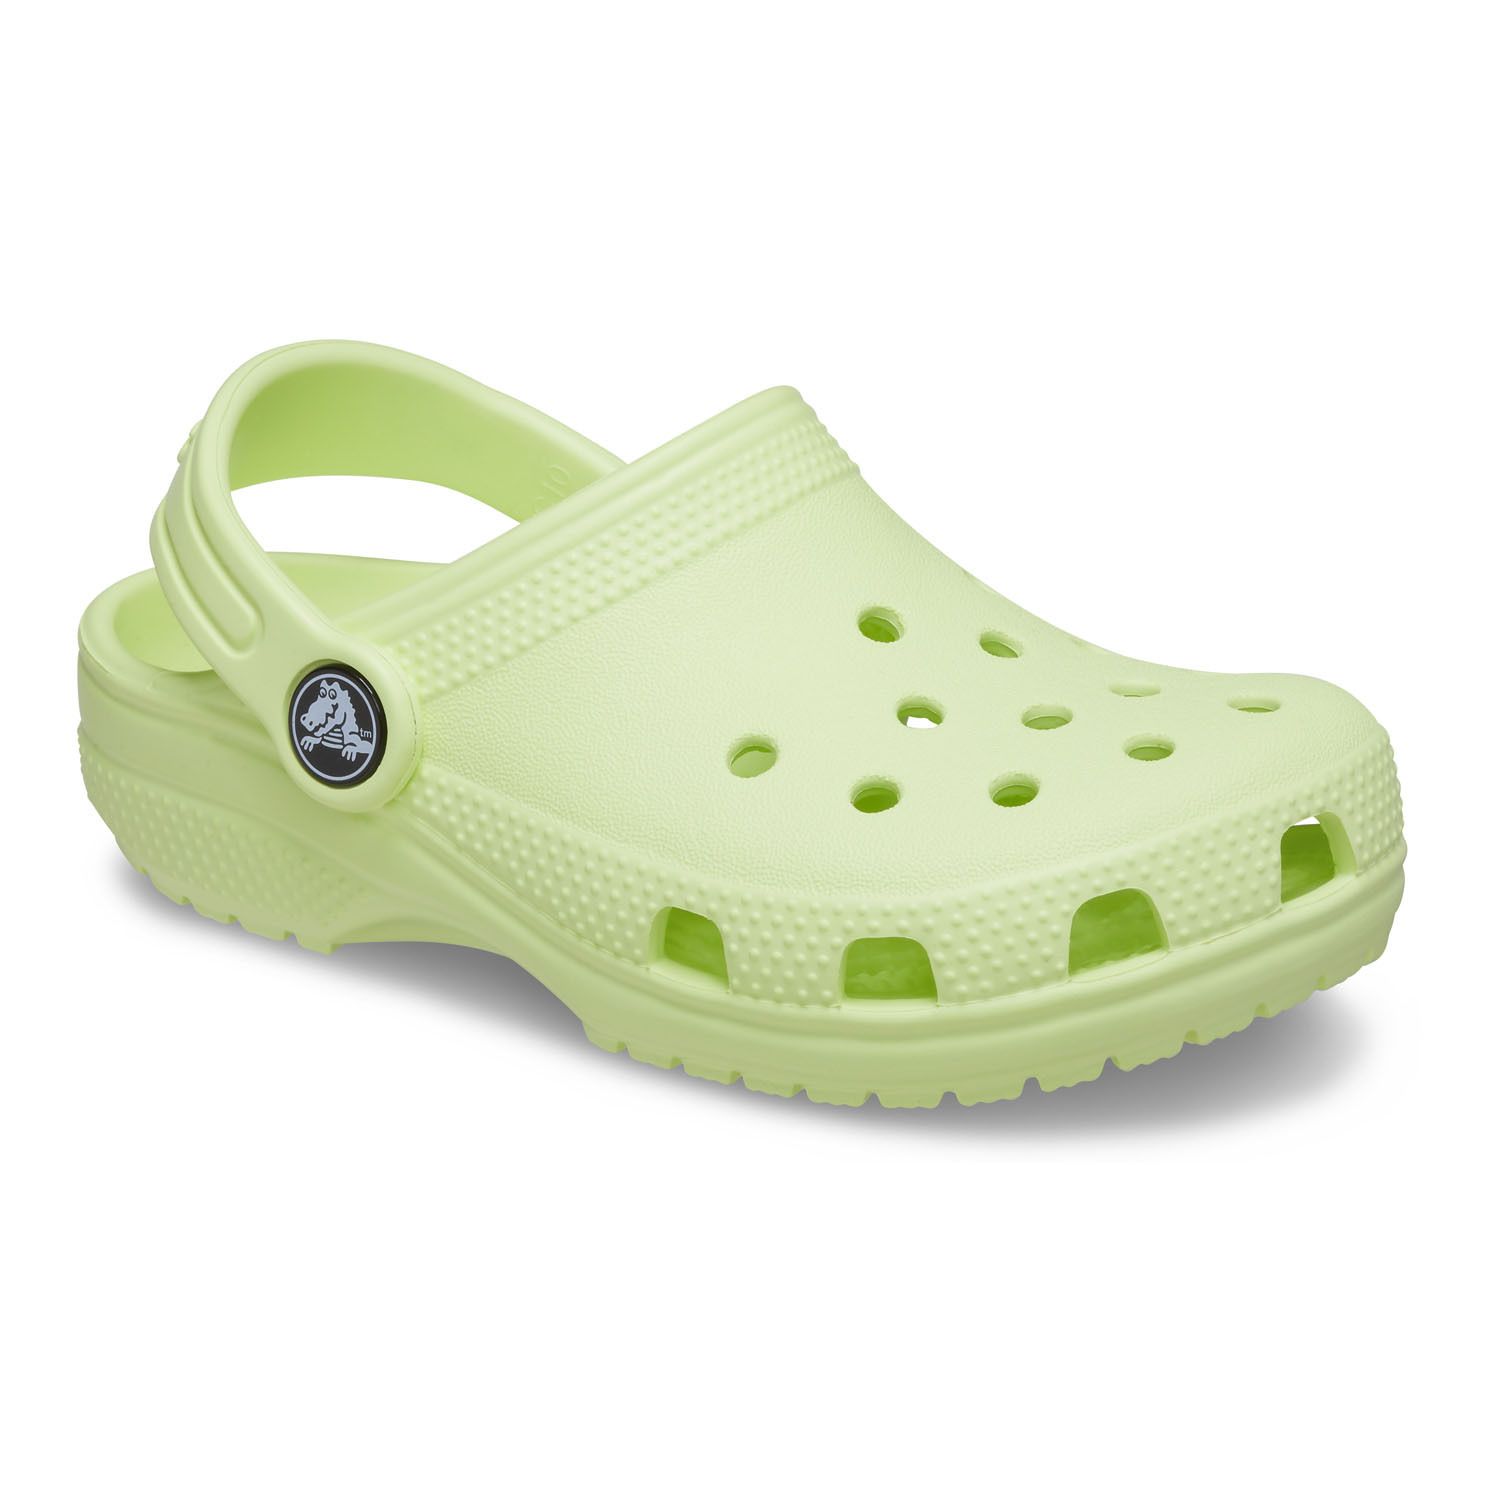 where to find crocs shoes near me